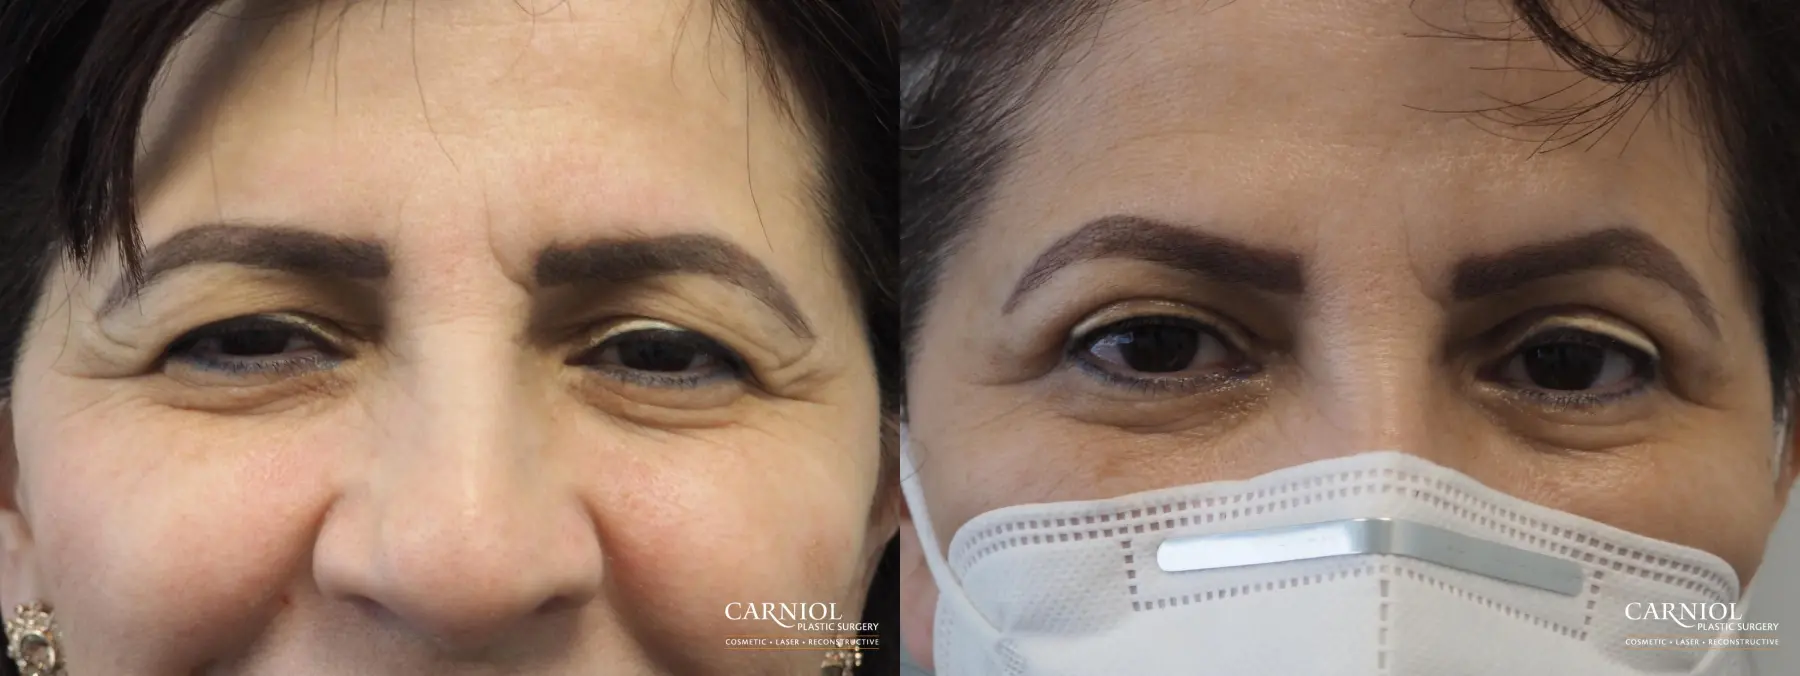 Blepharoplasty: Patient 7 - Before and After 1